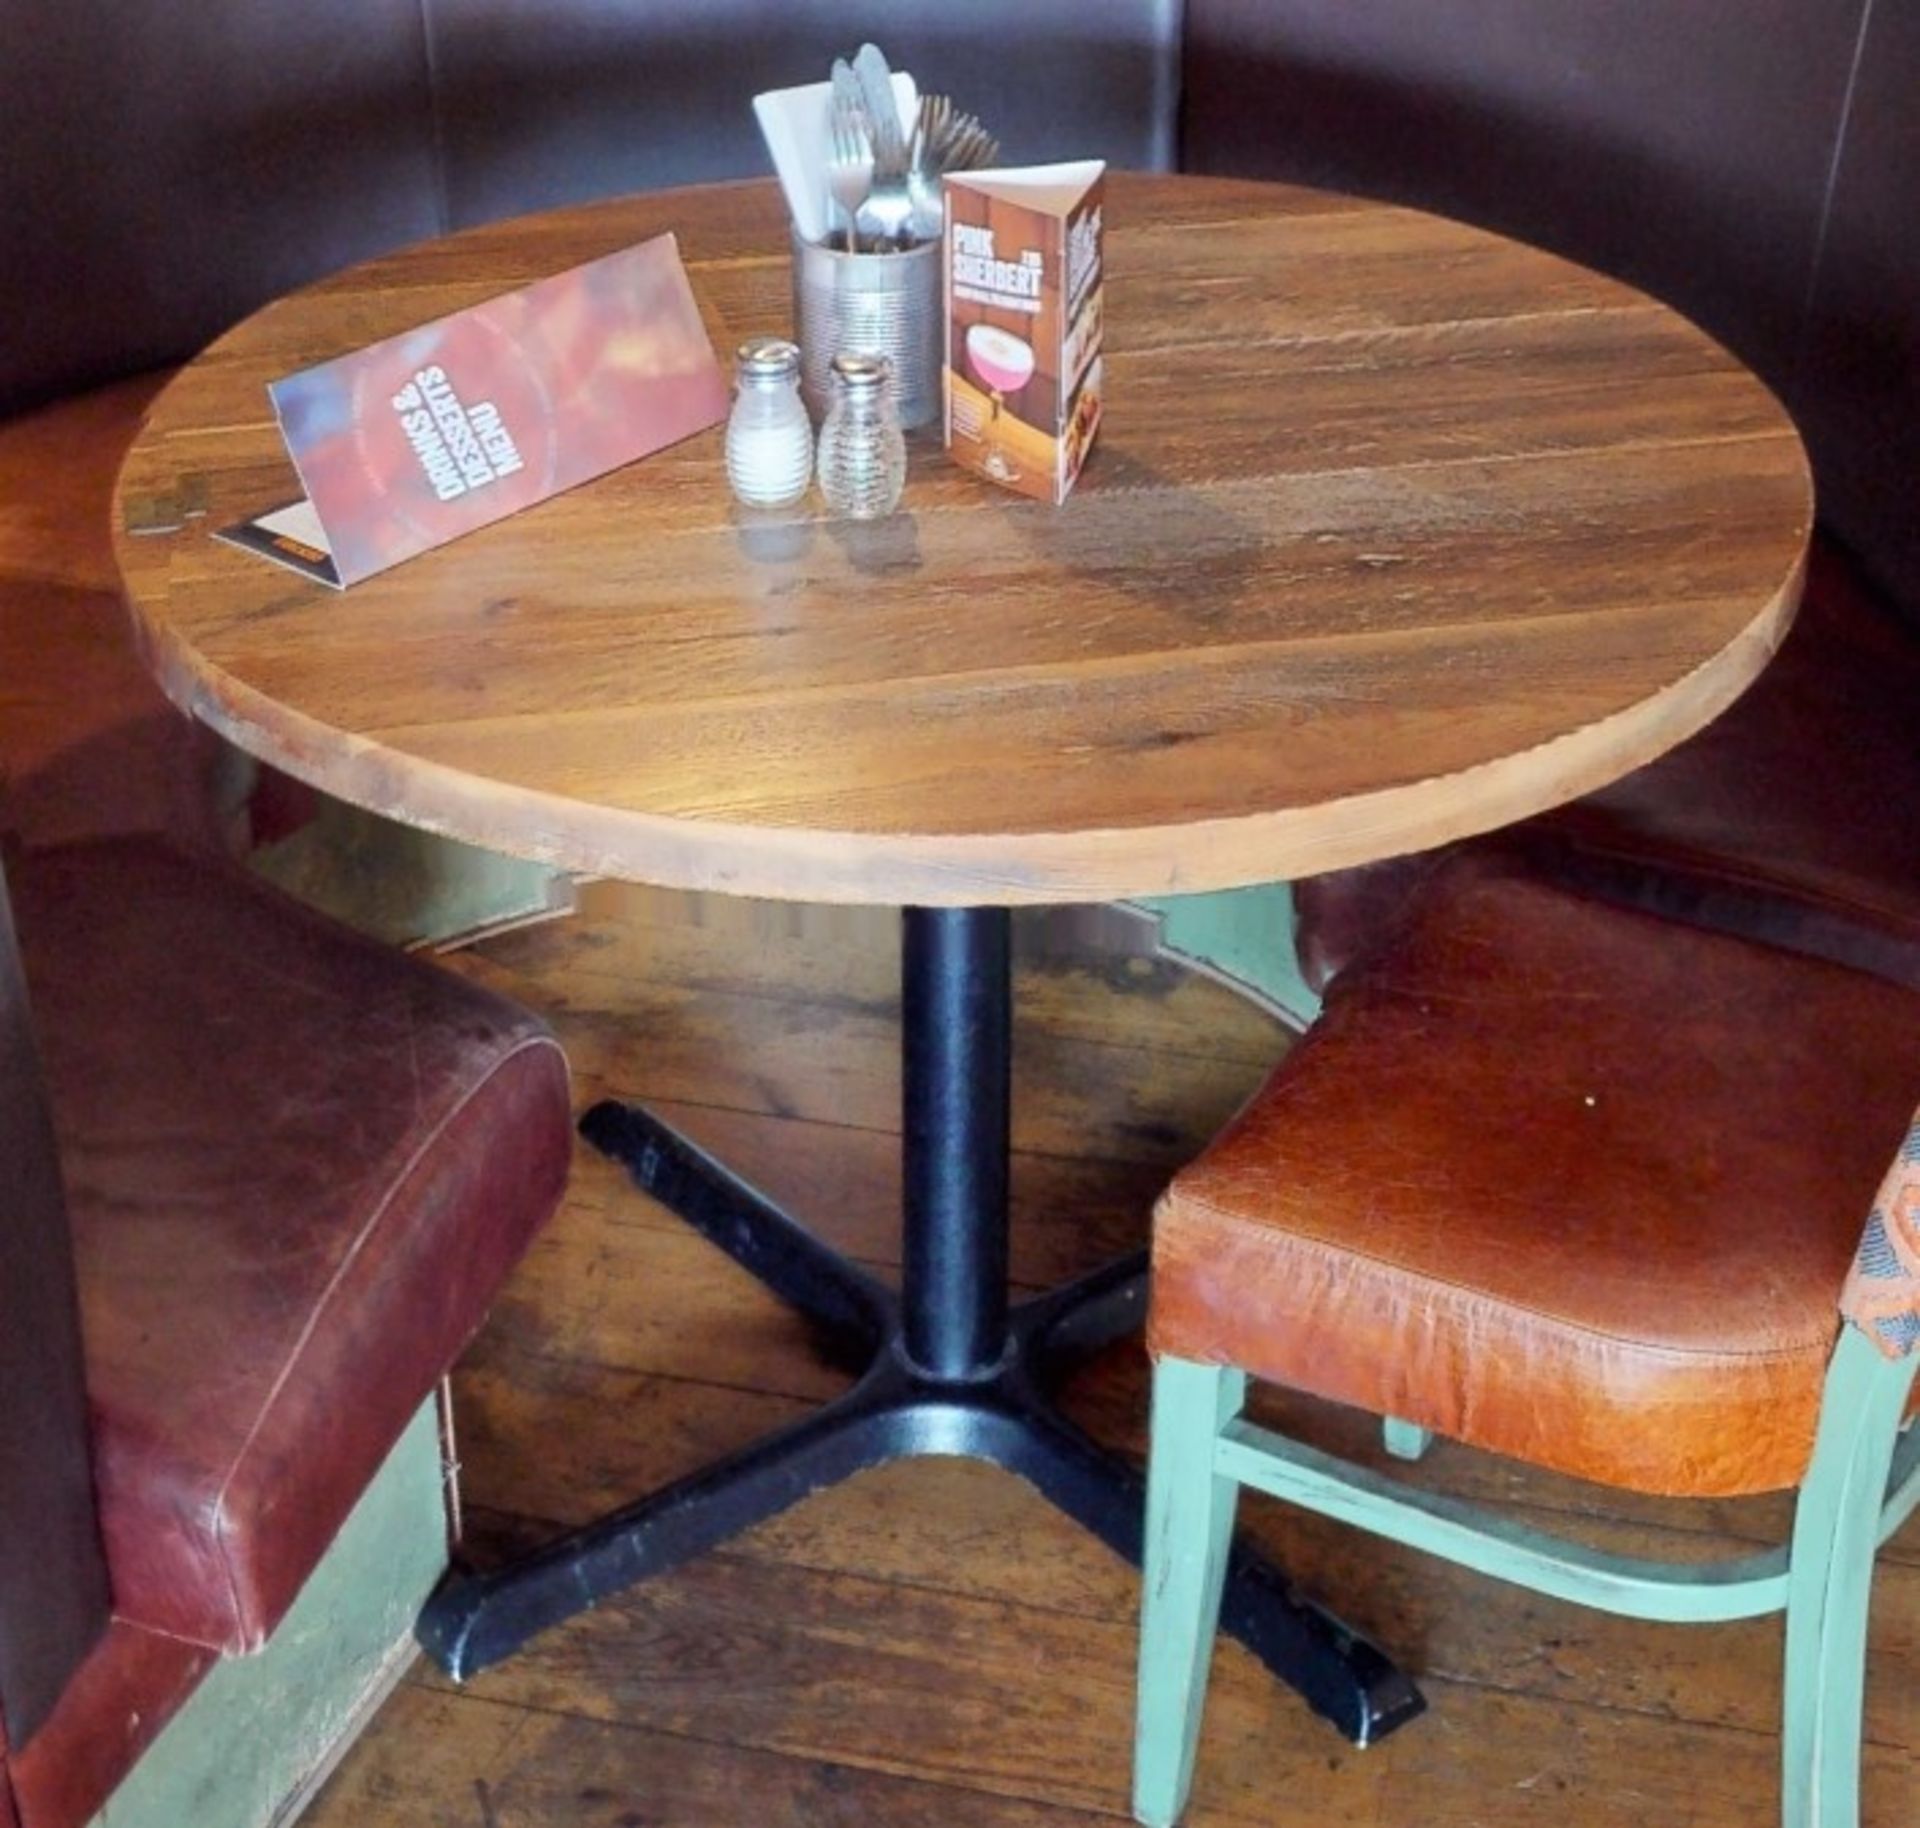 1 x Round Restaurant Dining Table With Cast Iron Base and Solid Wooden Top - 105cm Diameter